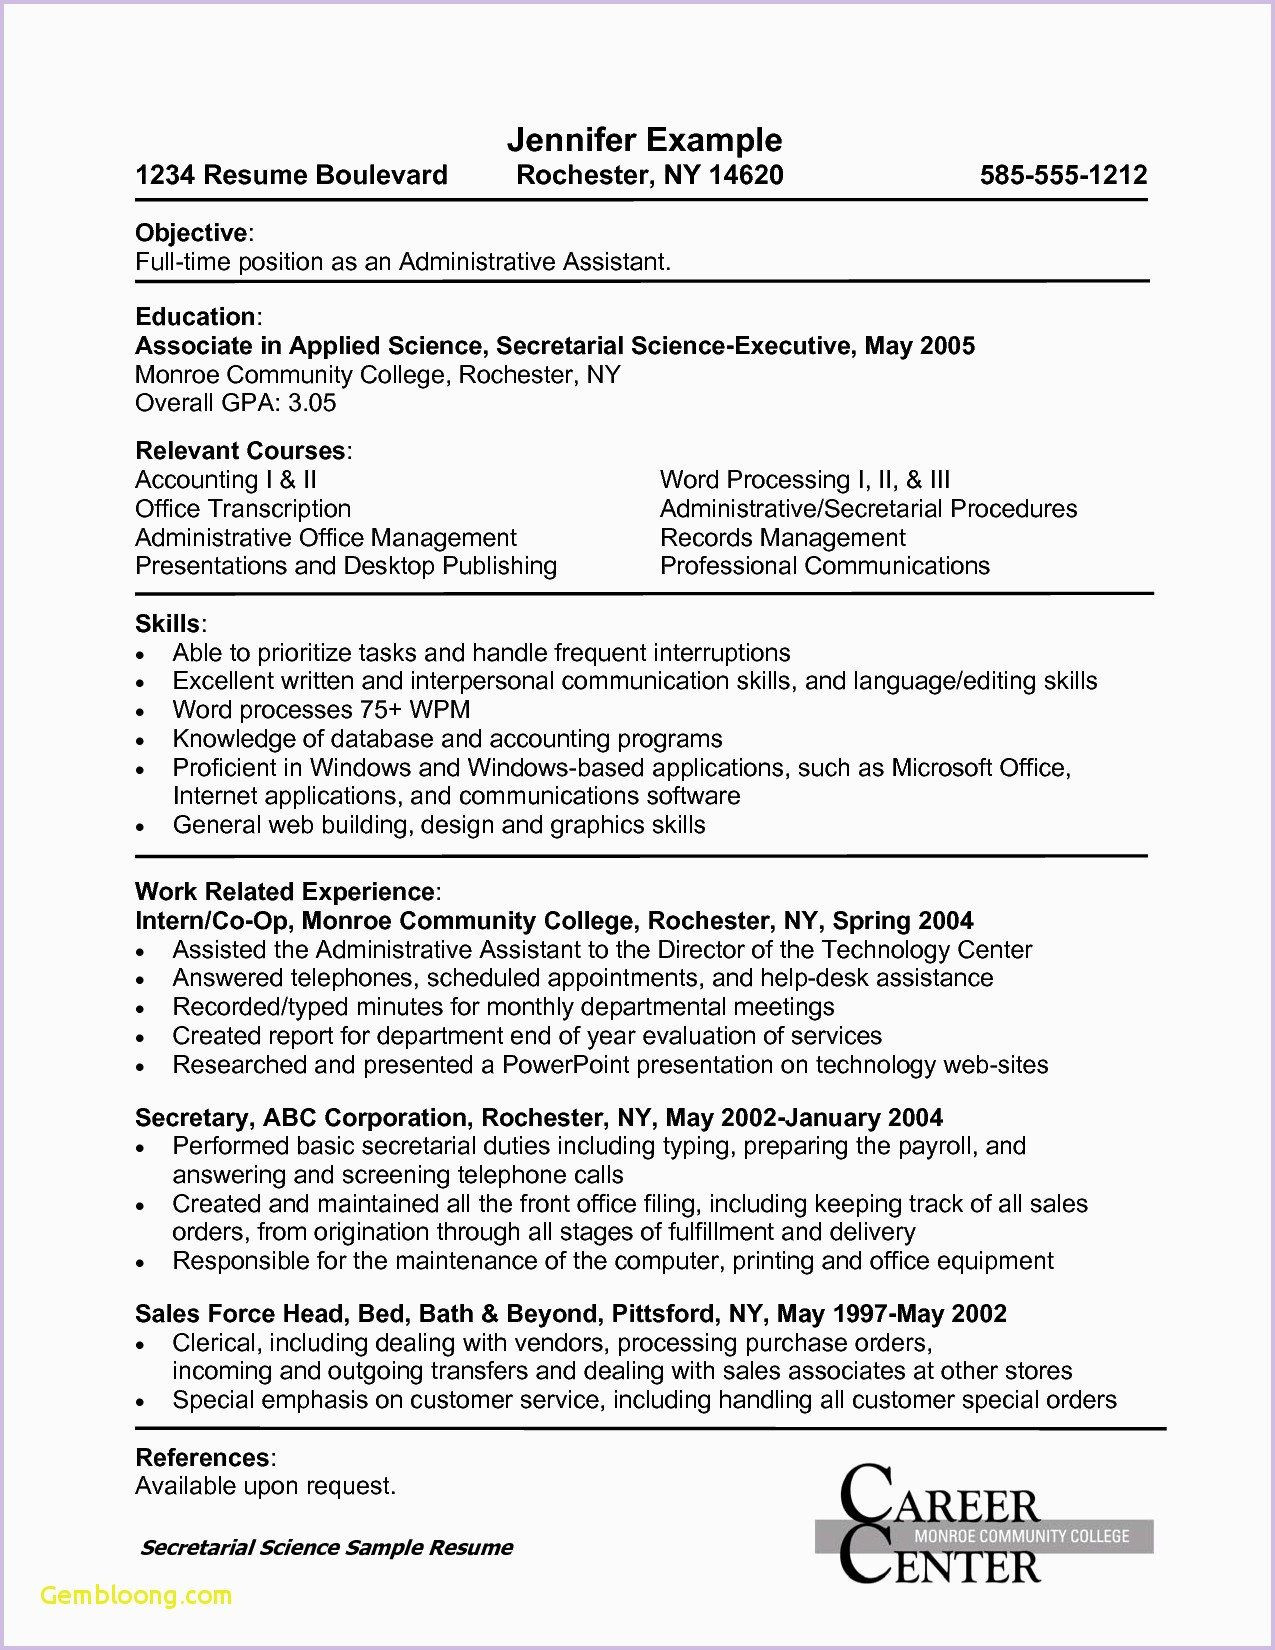 Sample Resume Objective Statements for Administrative assistant Office assistant Resume Examples Administrative assistant Resume …